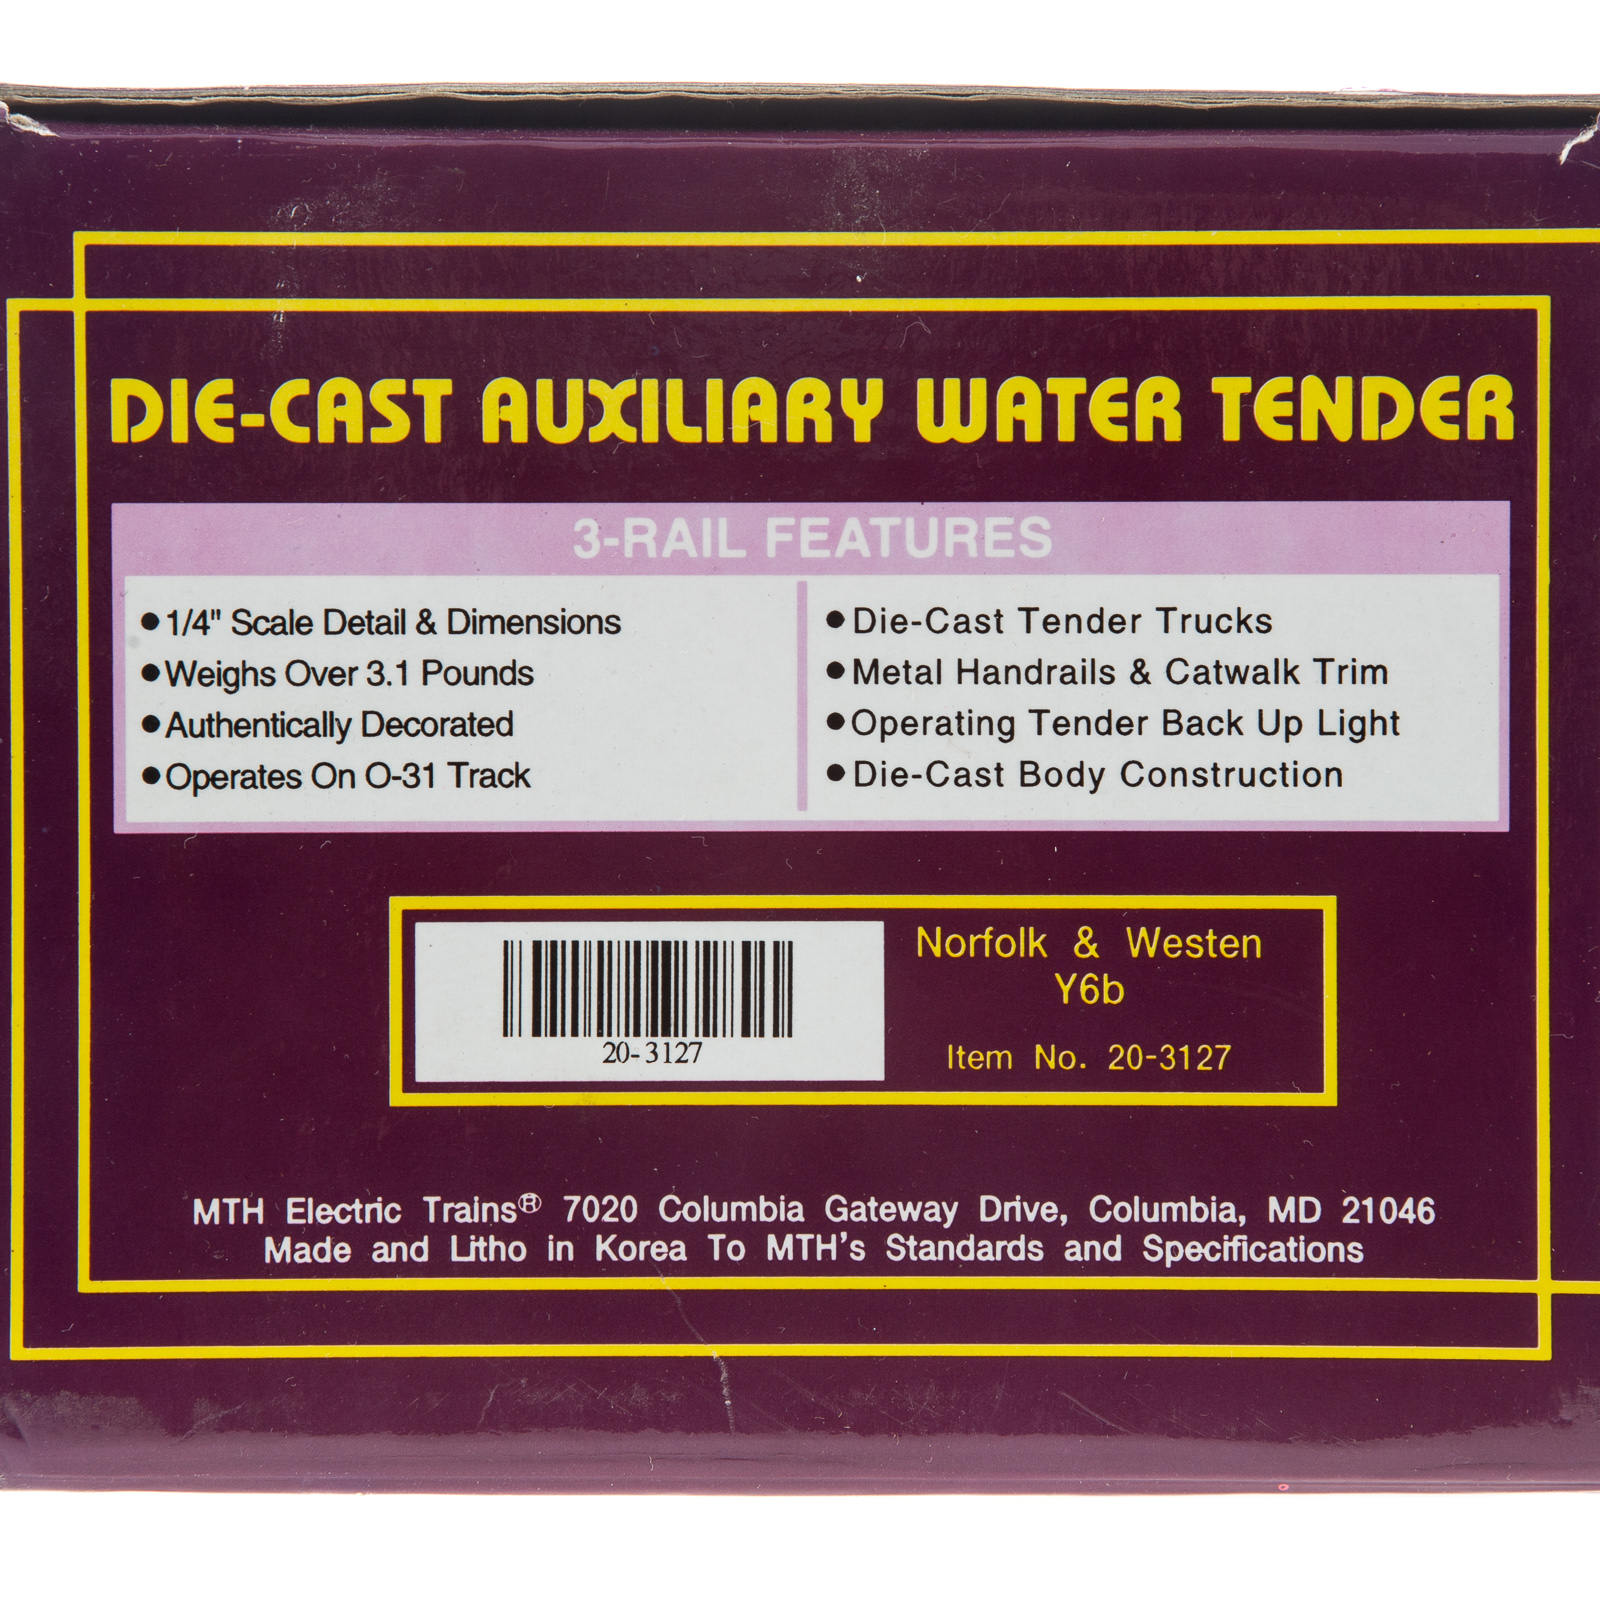 M T H DIE CAST AUXILIARY WATER 36a0dd